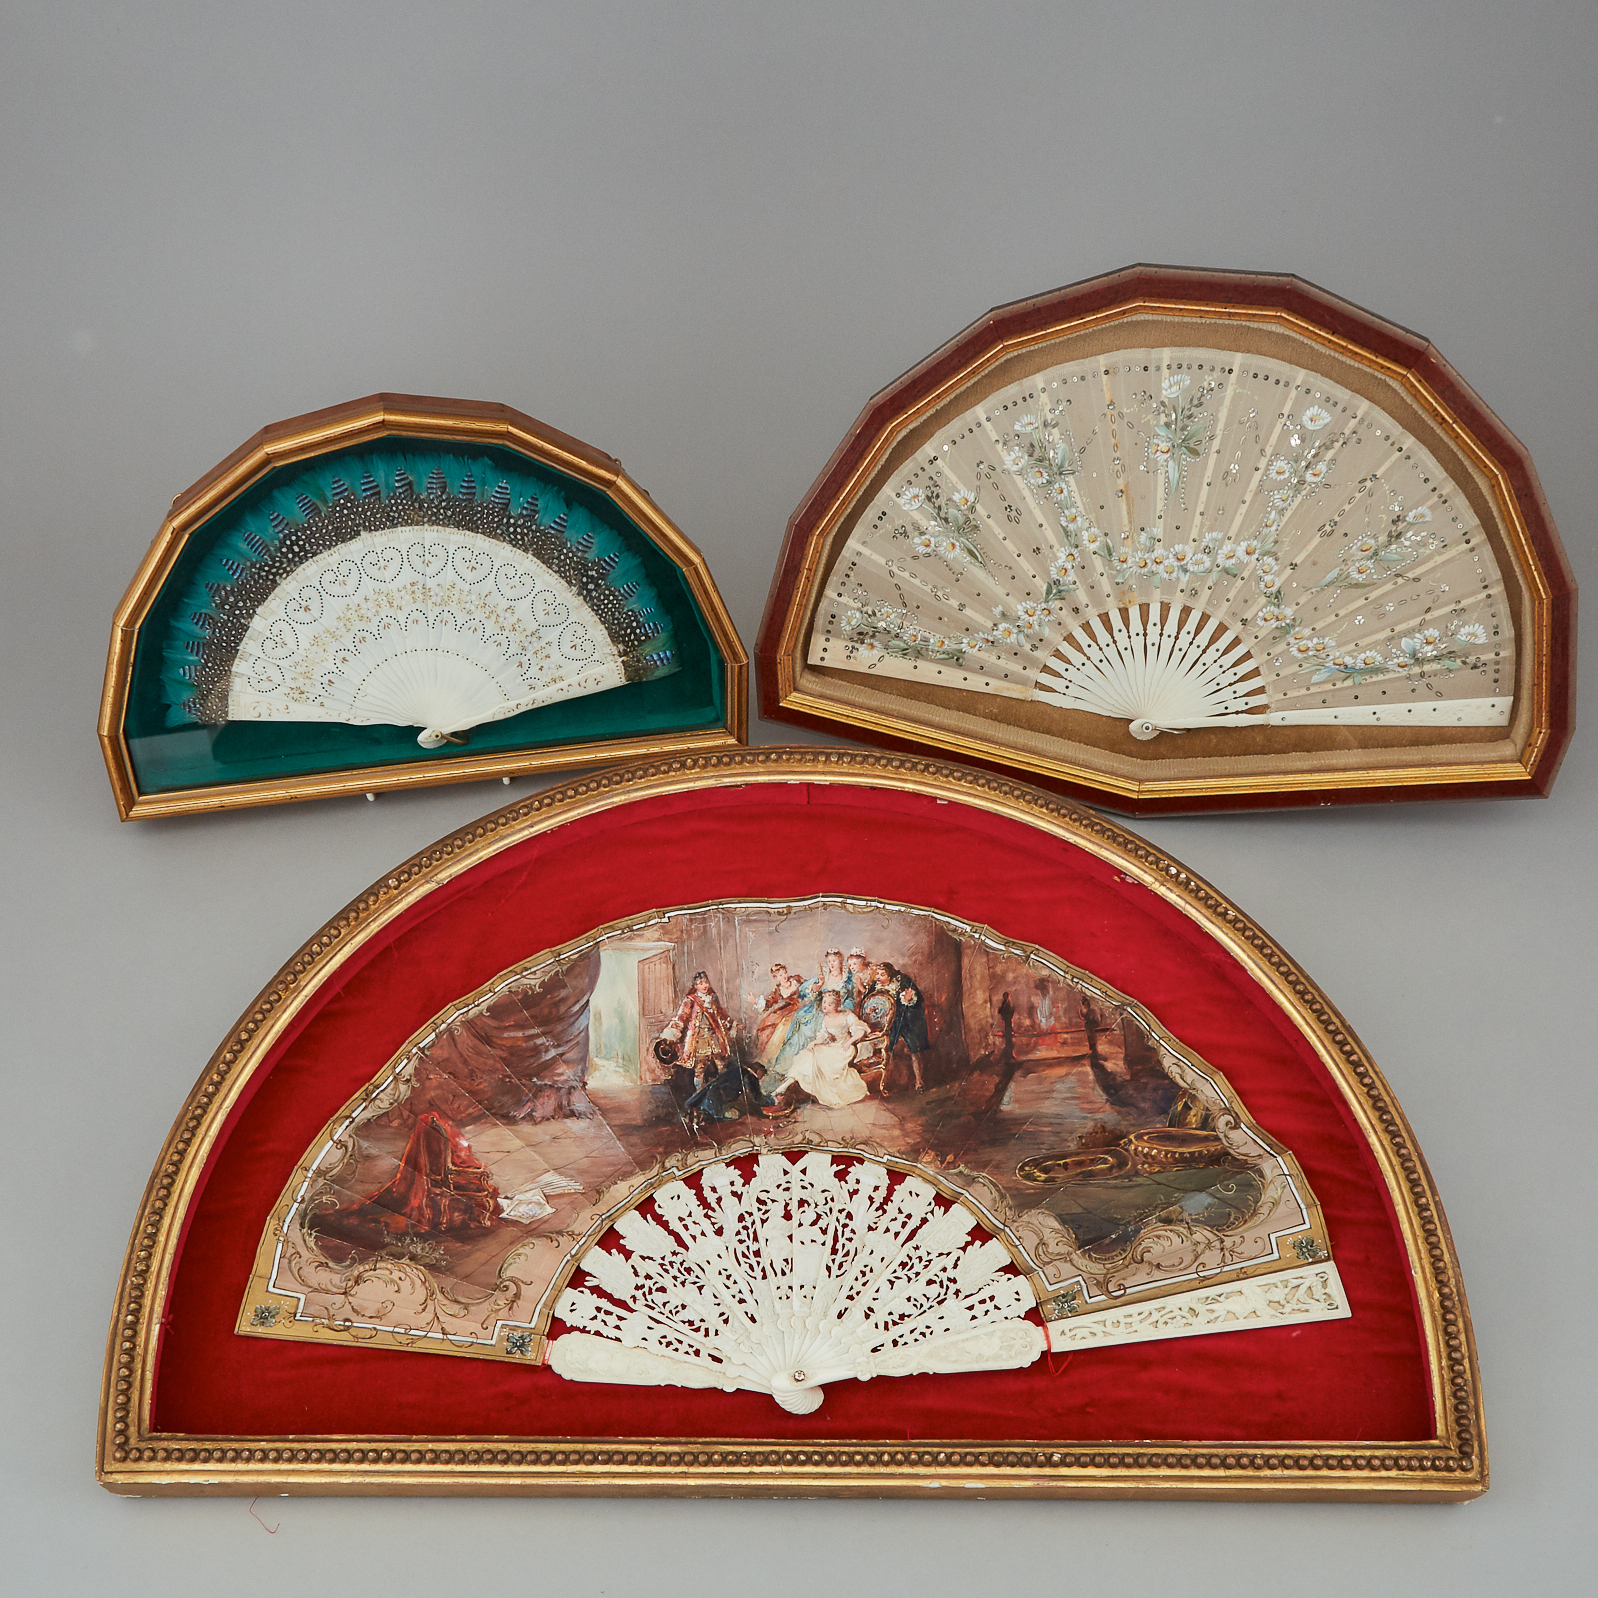 Three Cased French Fans, 19th and early 20th centuries